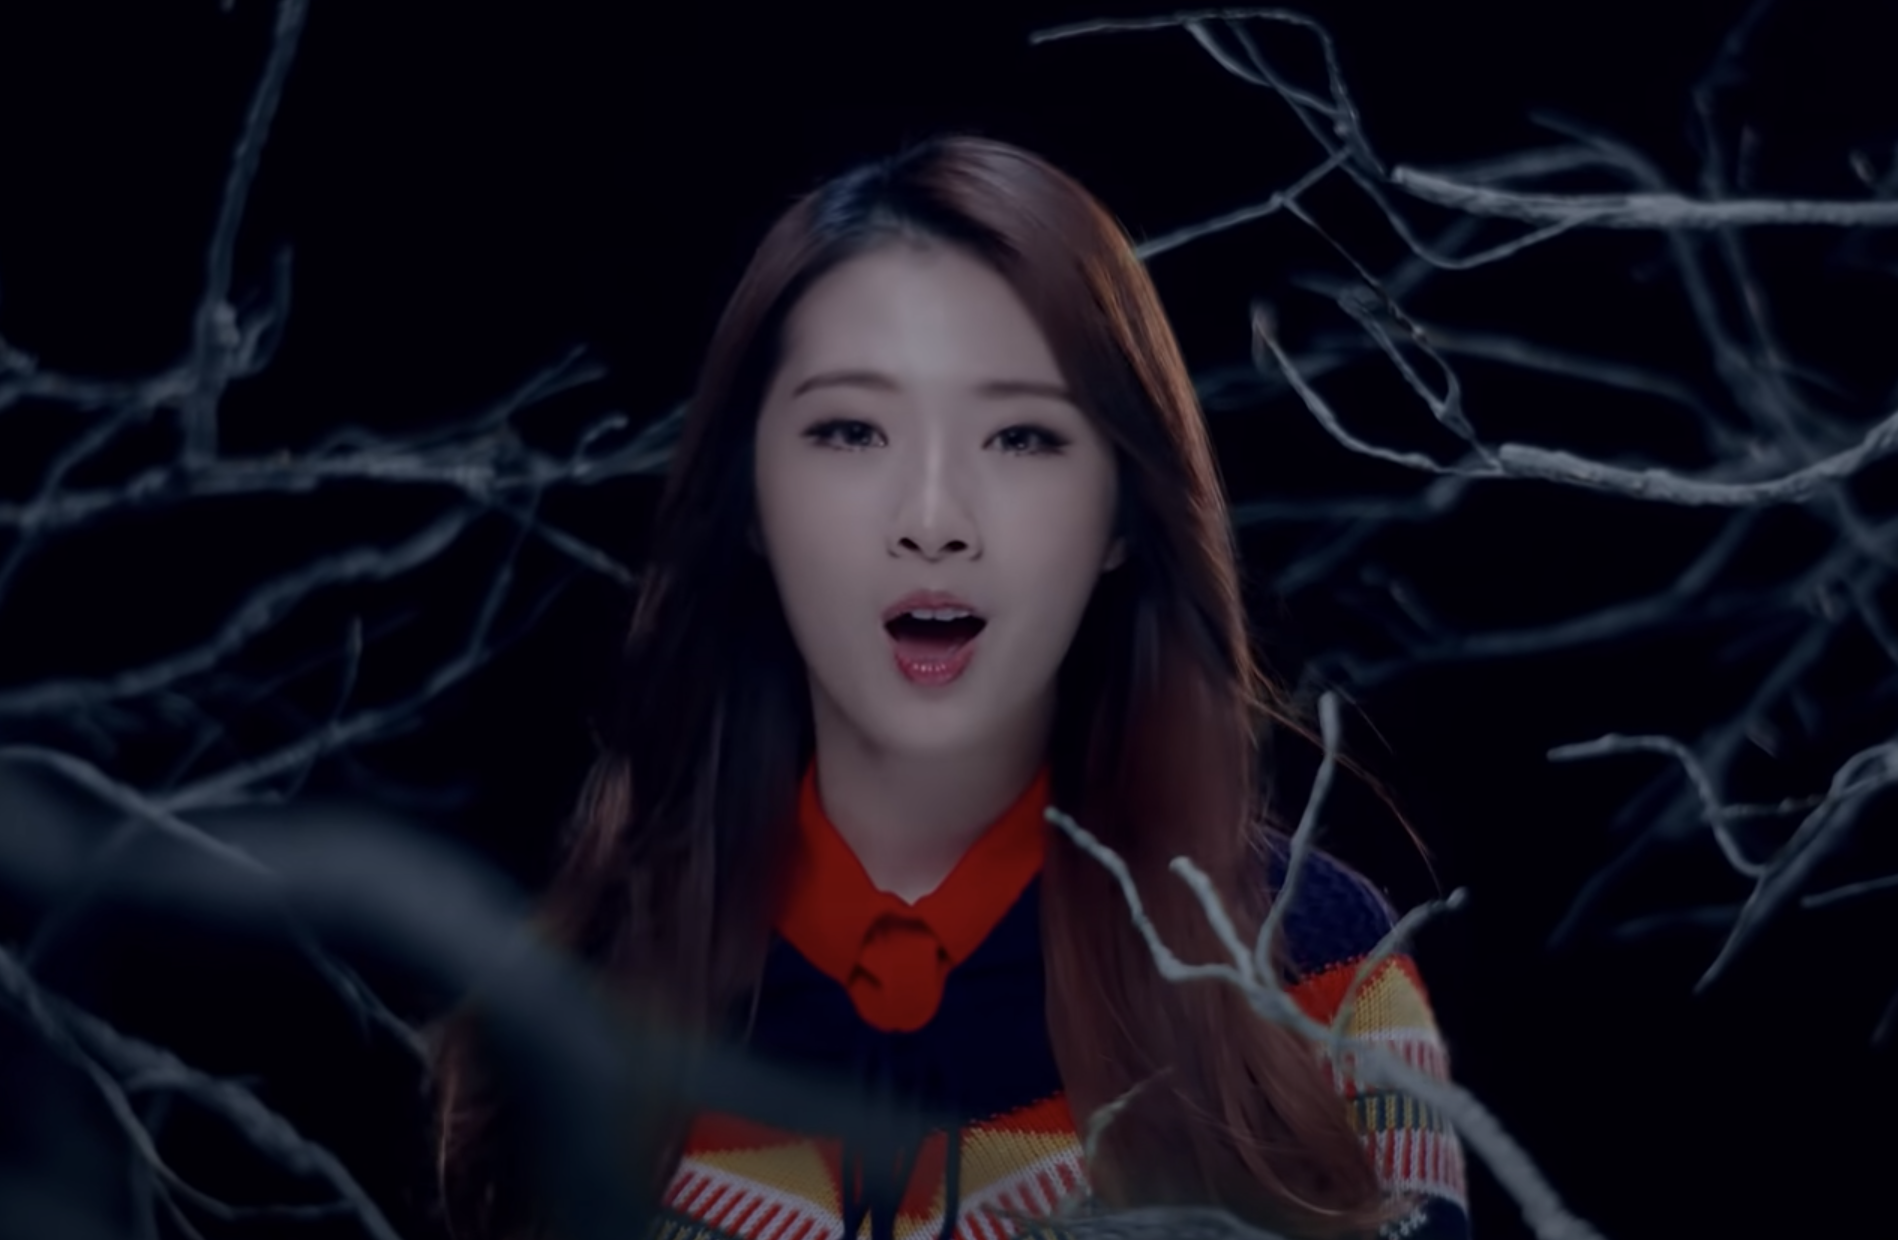 HaSeul sings in front of a bunch of tree branches